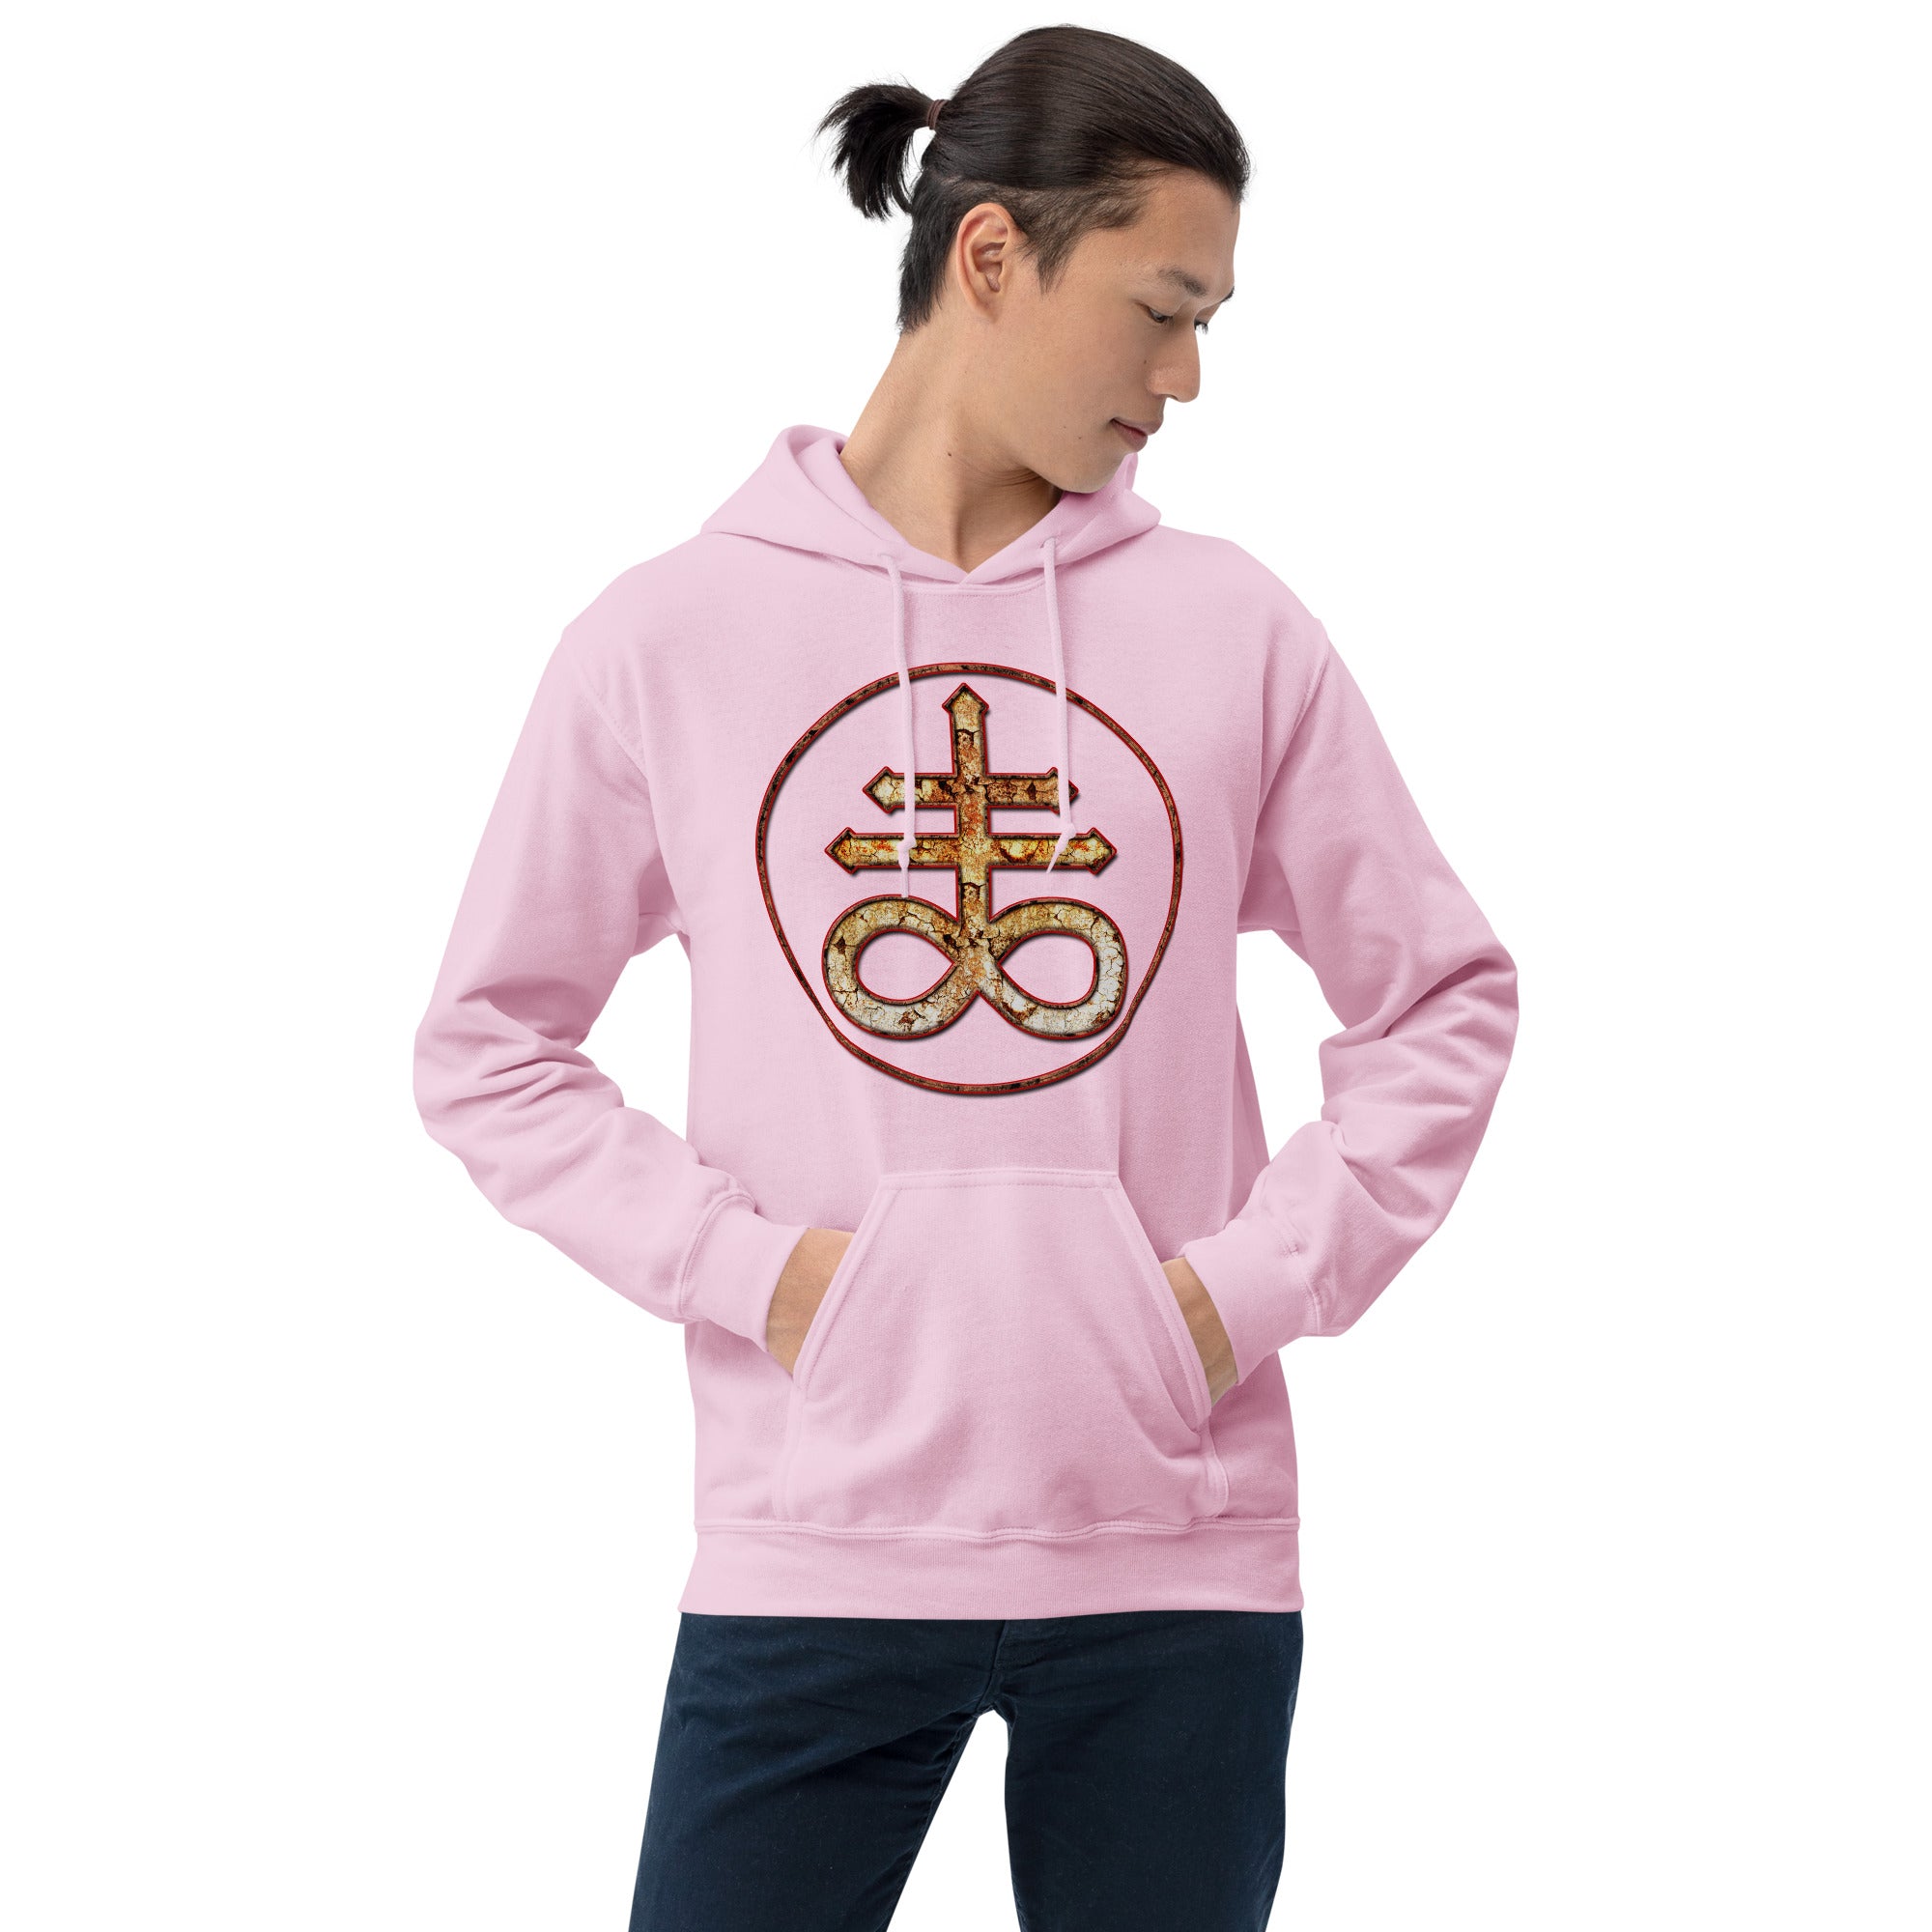 Withered Evil Satan's Cross Leviathan Symbol Pullover Hoodie Sweatshirt